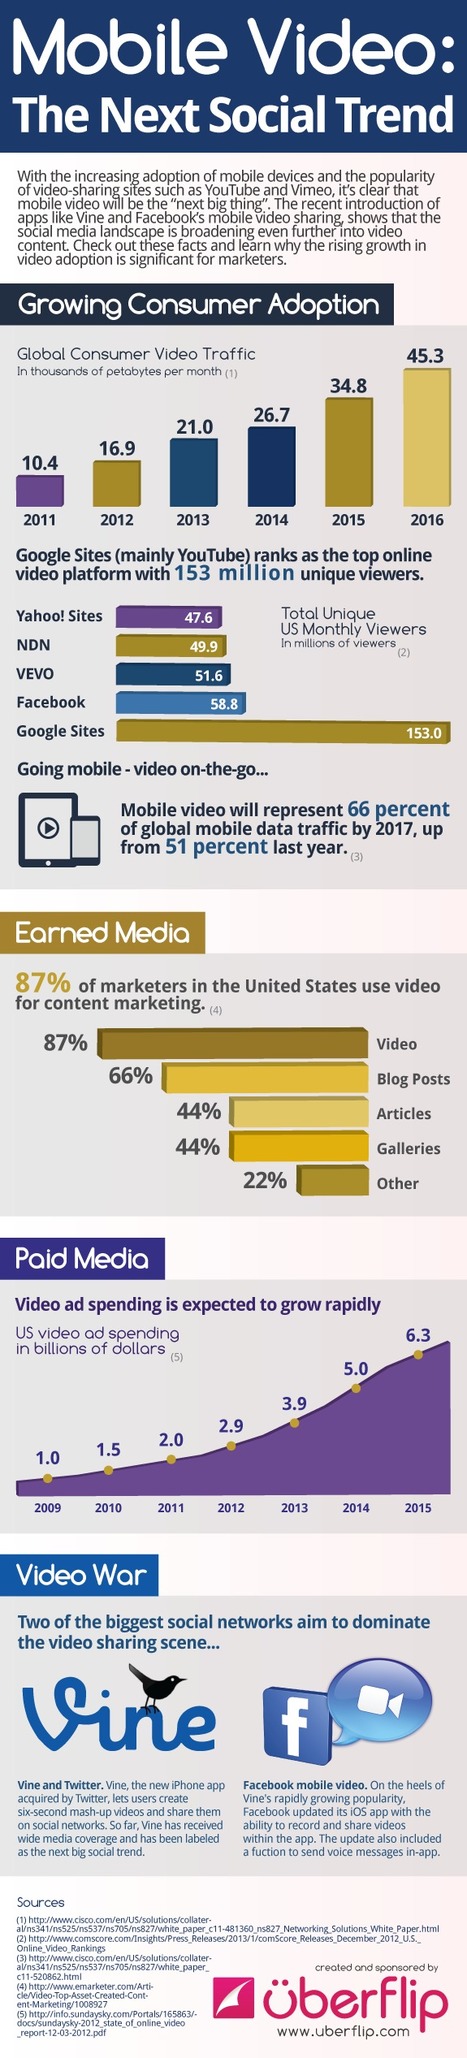 Is Mobile Video The Next Big Thing In Social Media? [INFOGRAPHIC] | Latest Social Media News | Scoop.it